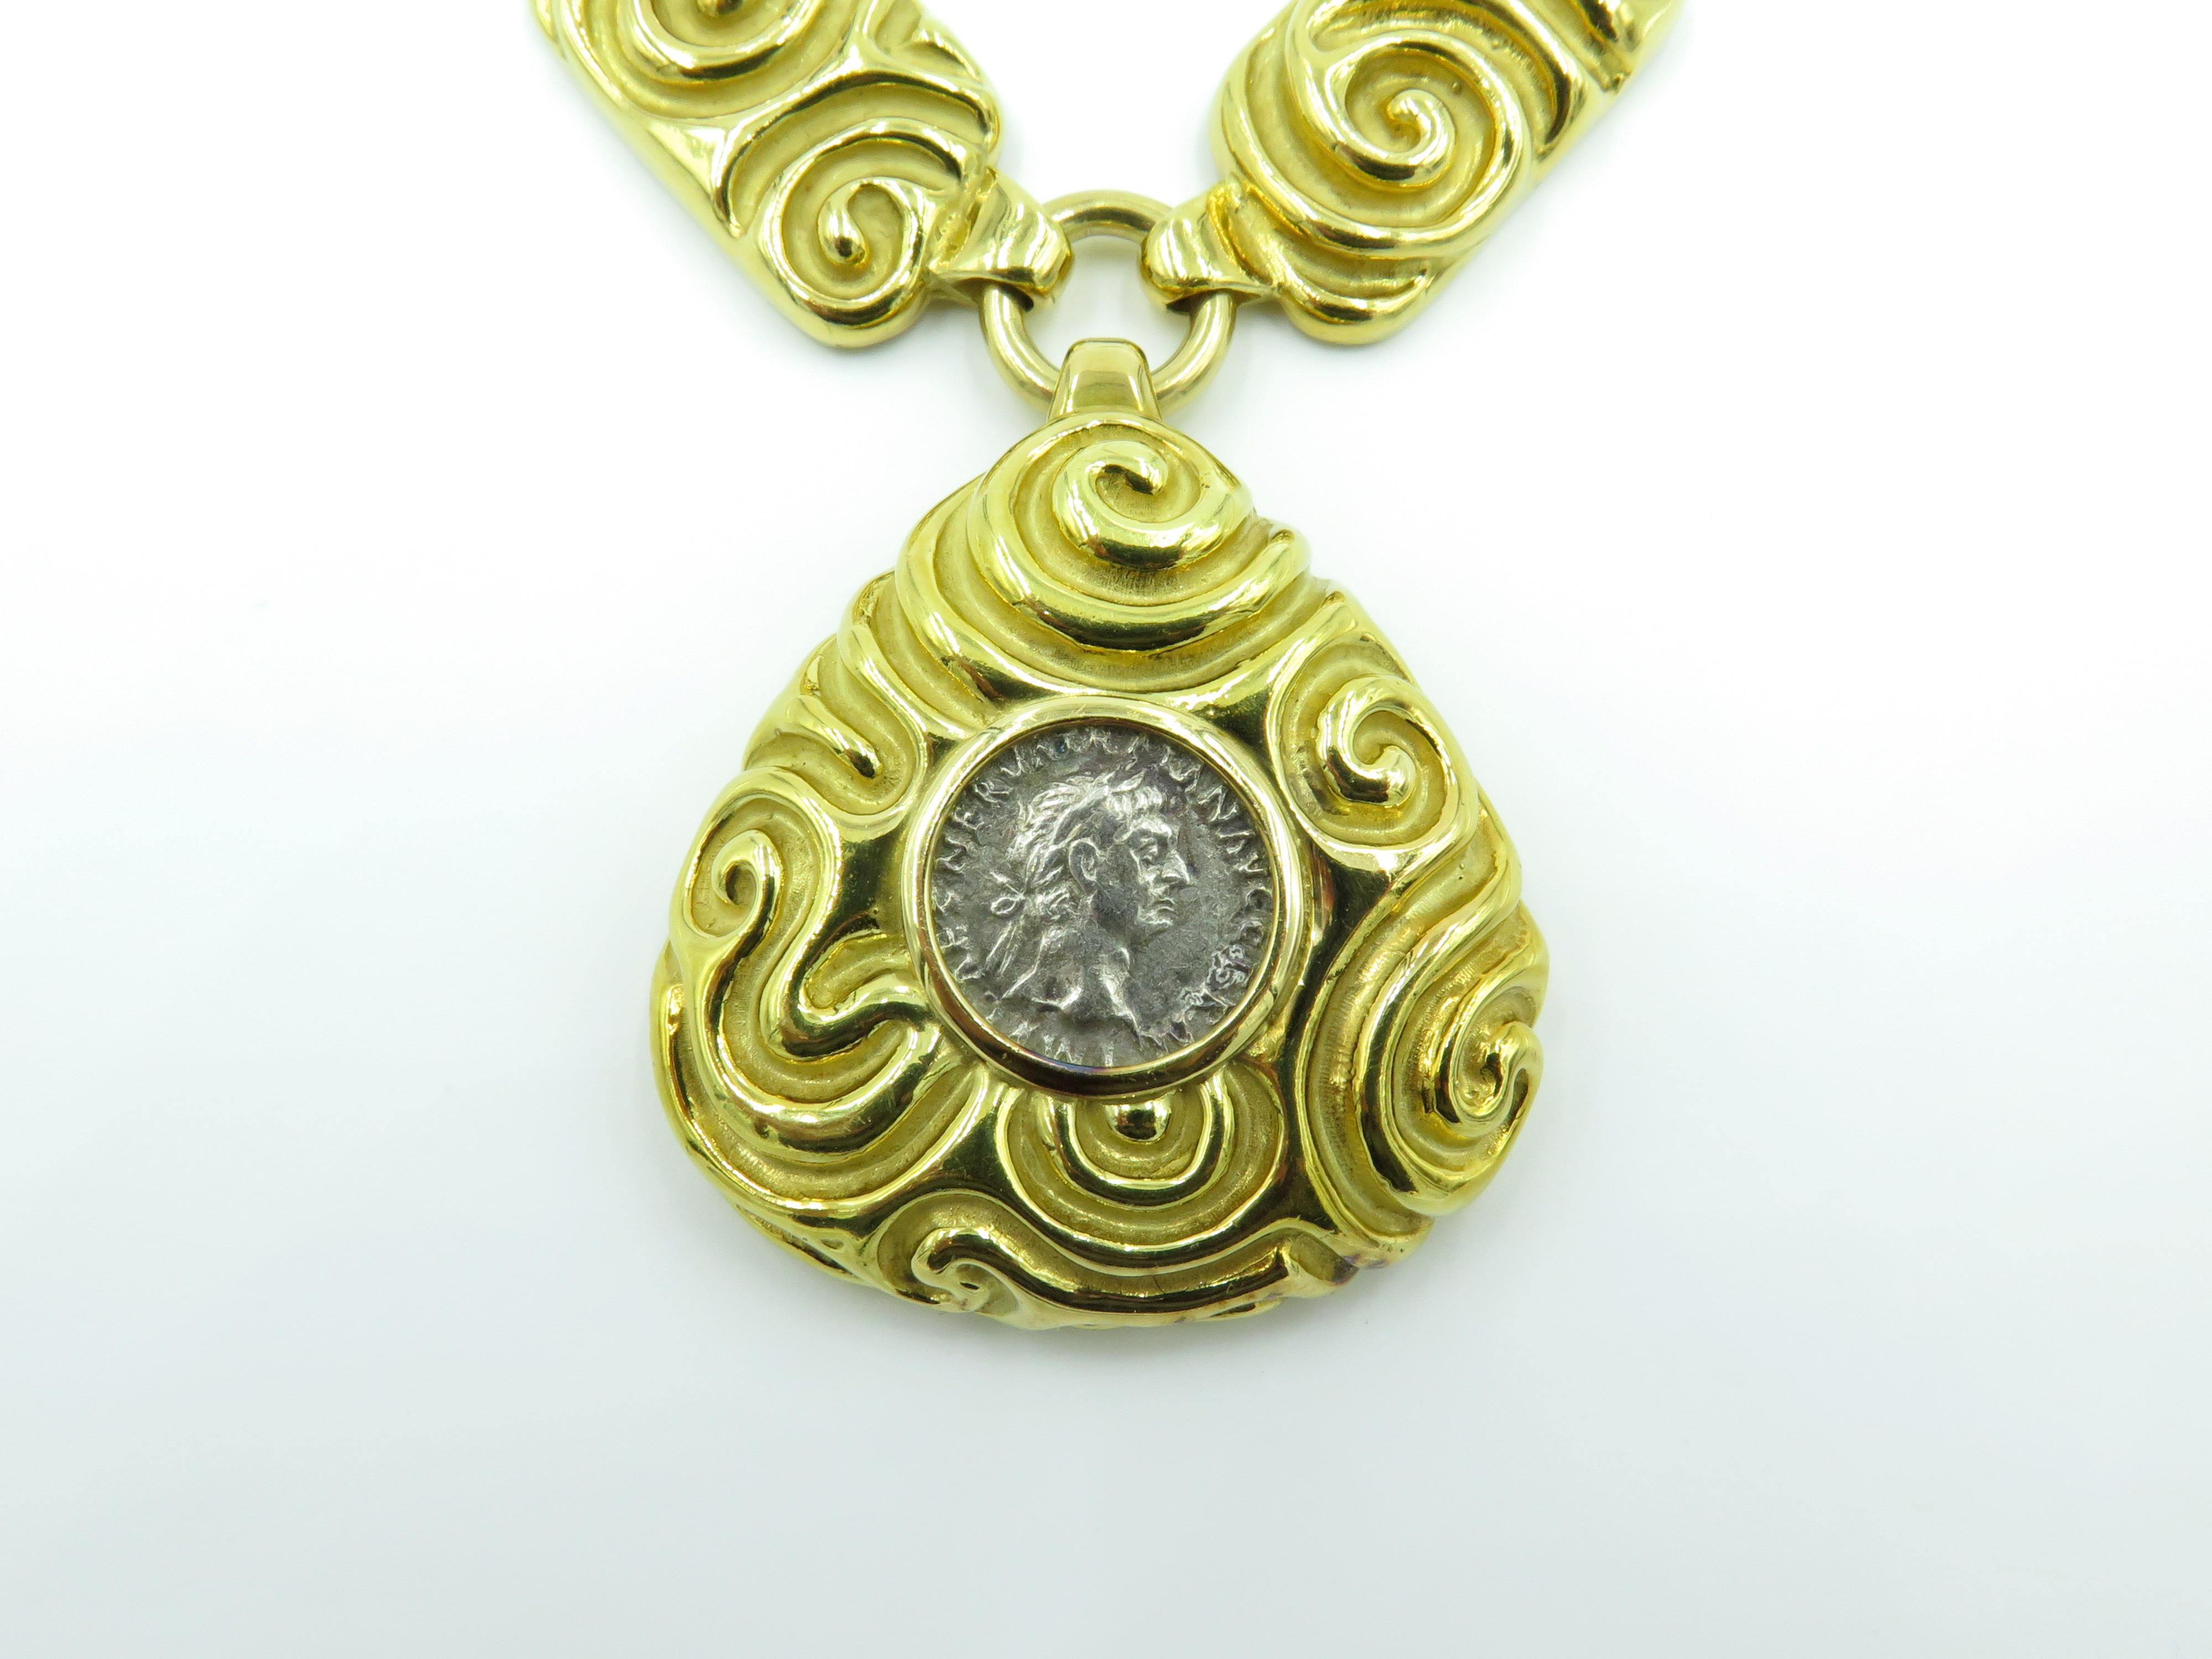 An 18 karat yellow gold and ancient coin necklace. Elizabeth Gage. Circa 1990.  Of Etruscan inspired design, suspending a textured gold shield shaped pendant, decorated with a scrolling design, centering an ancient coin depicting a man in profile,